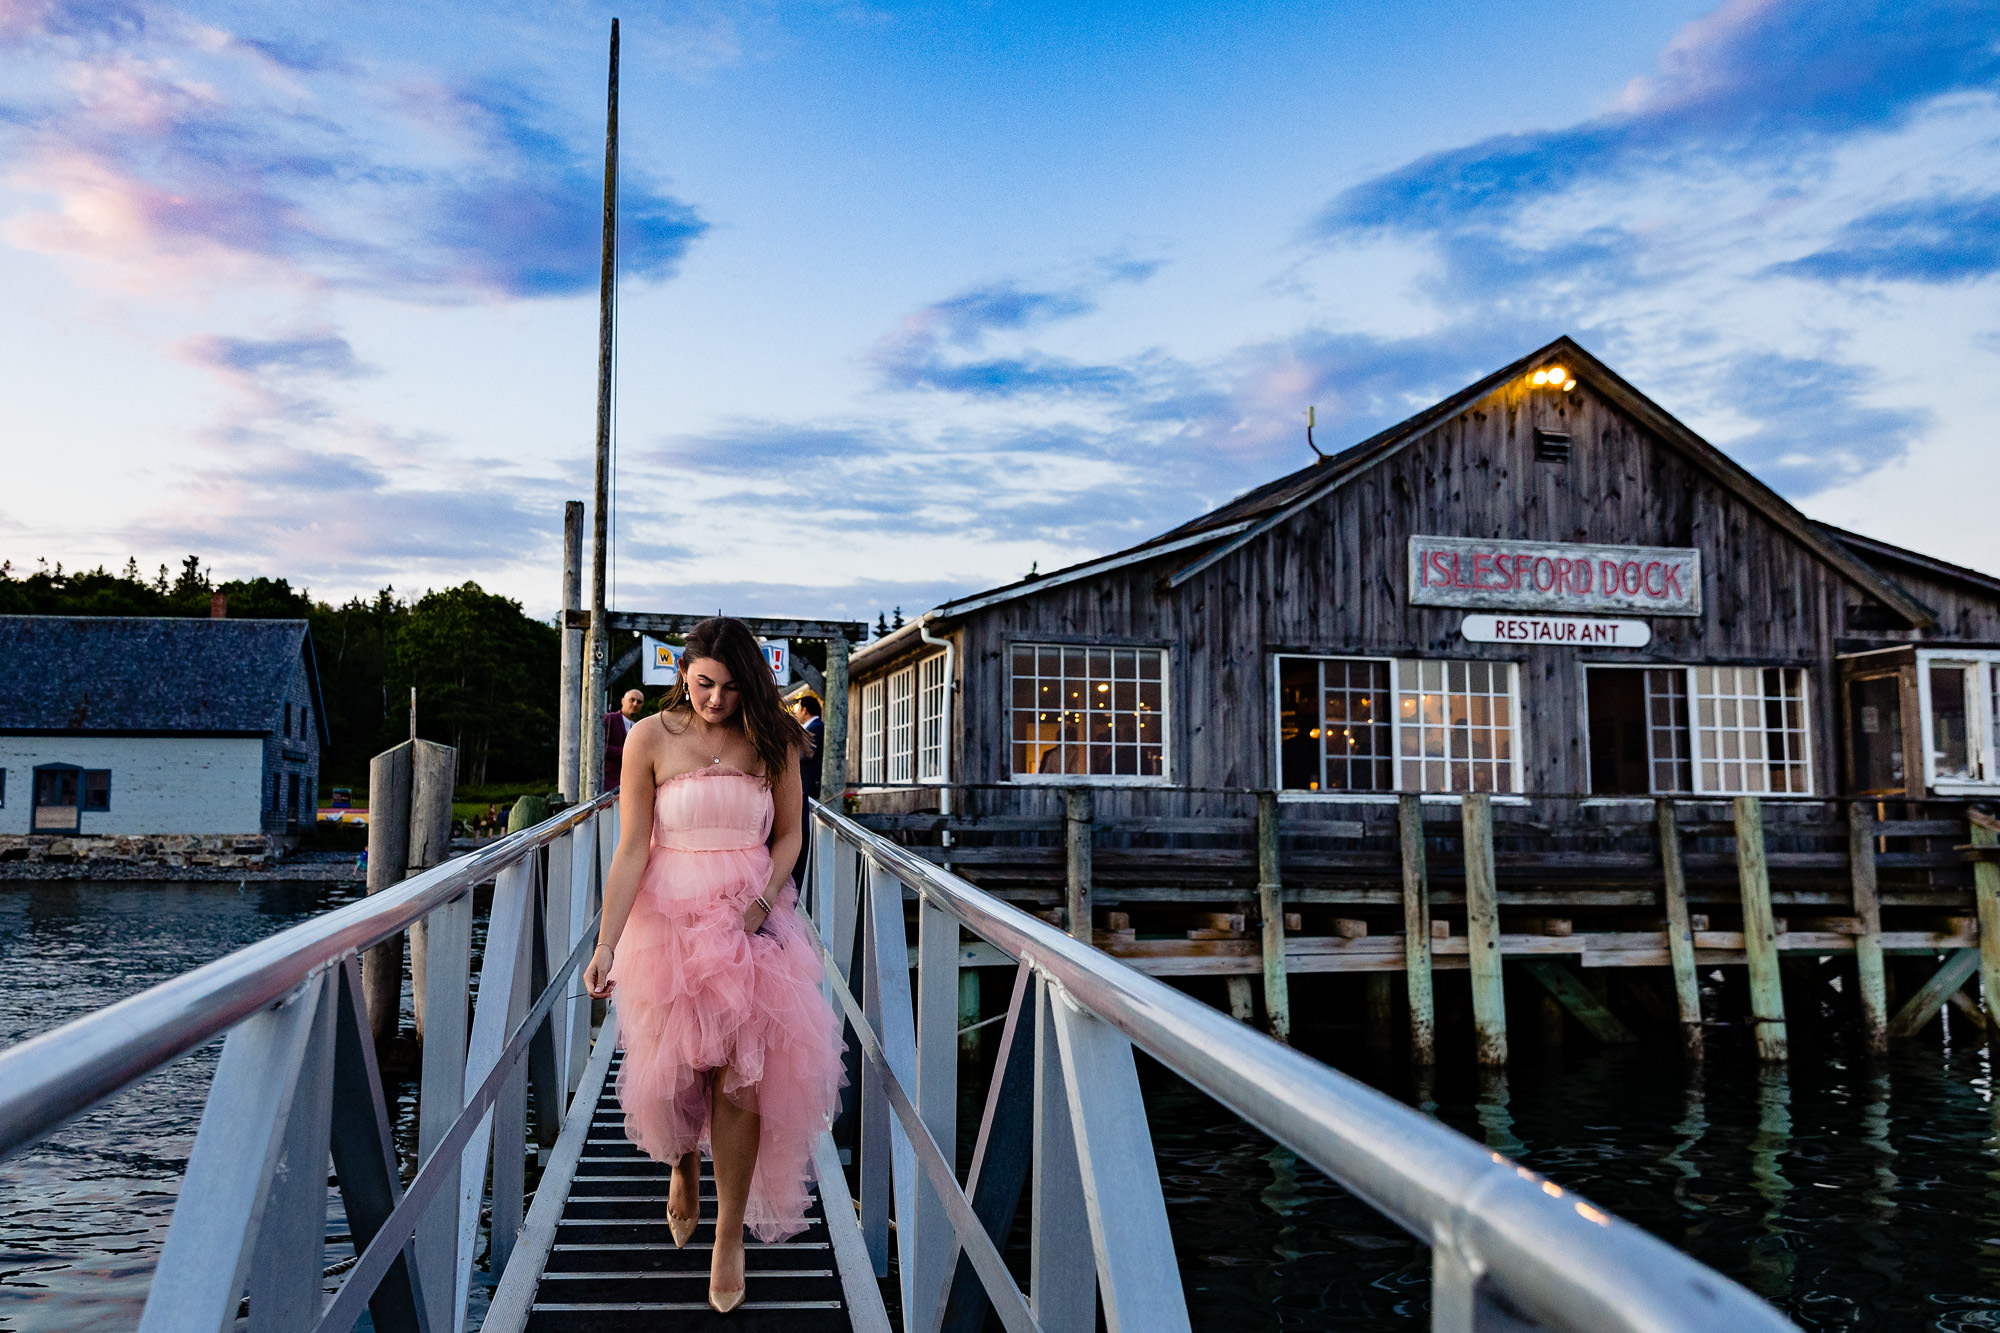 A wedding at the Islesford Dock Restaurant in Islesford, Maine